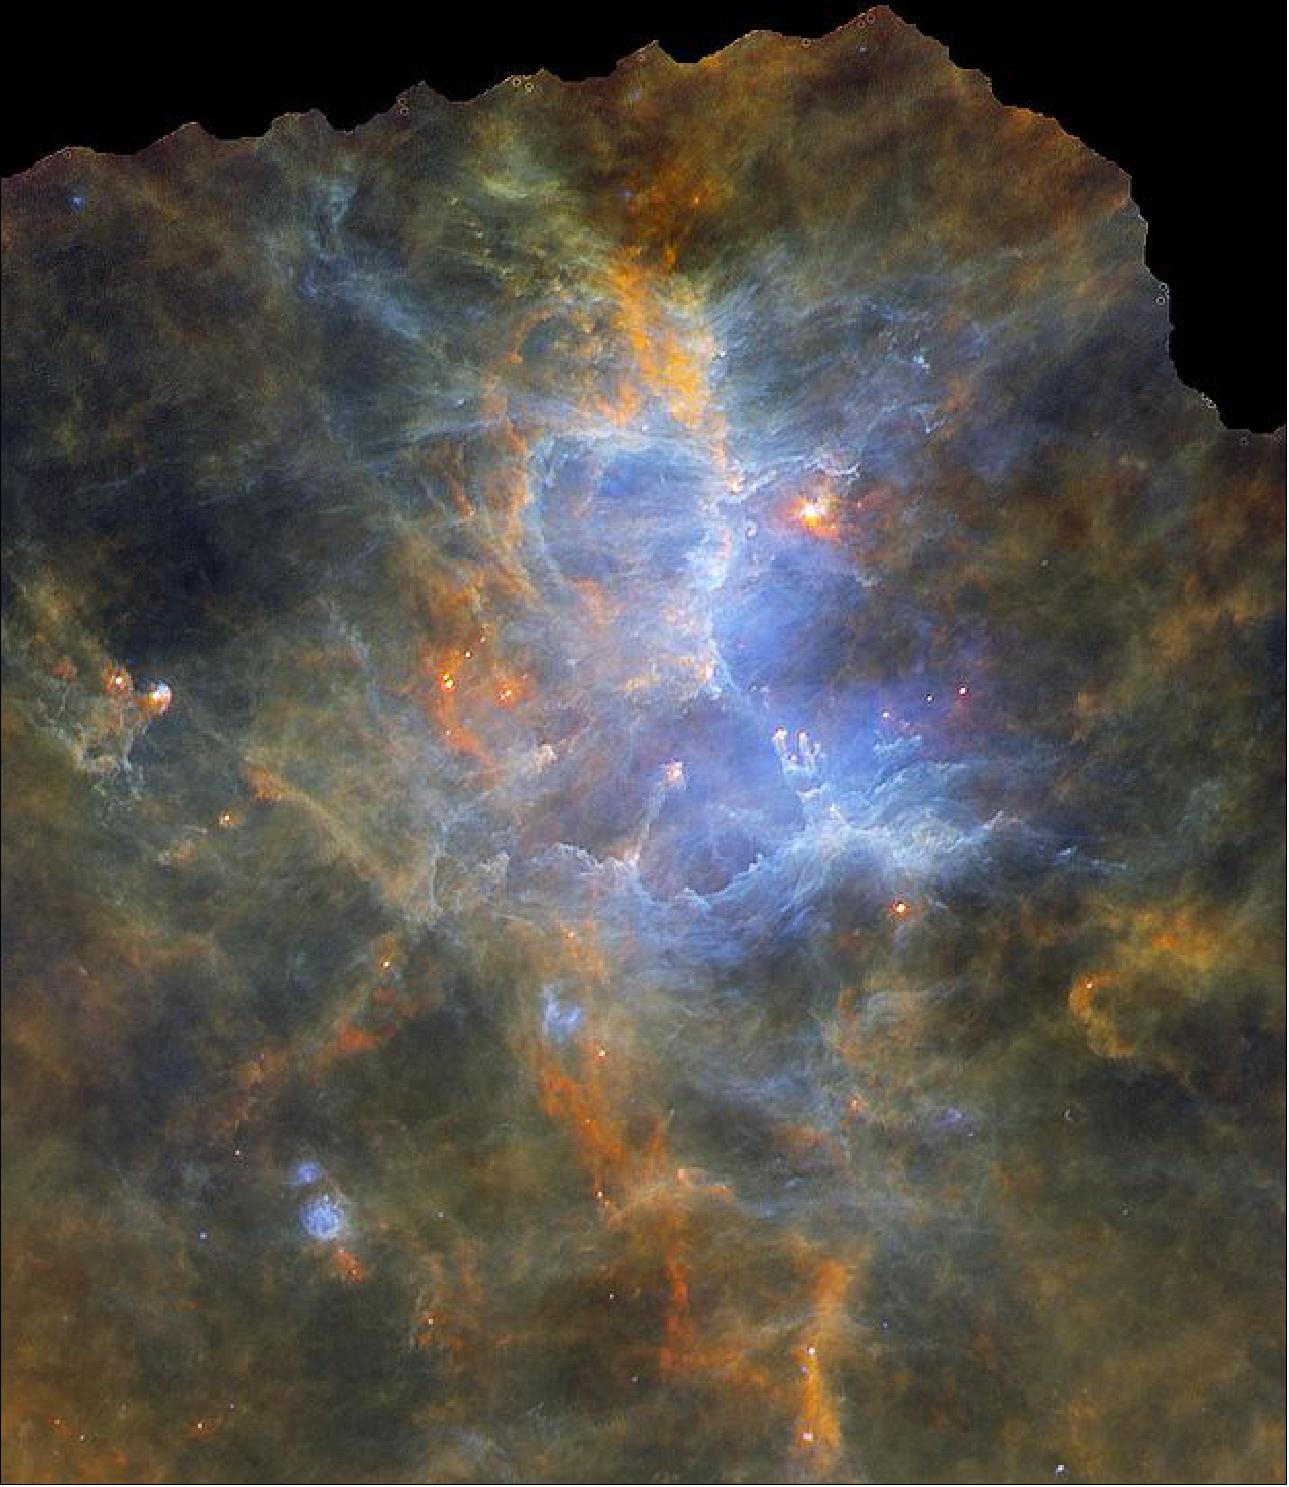 Figure 41: The Eagle Nebula, also known as M16, seen by ESA's HSO (Herschel Space Observatory) ; the nebula lies about 6500 light-years away (image credit: ESA/Herschel/PACS, SPIRE/Hi-GAL Project, G. Li Causi, IAPS/INAF, Italy)